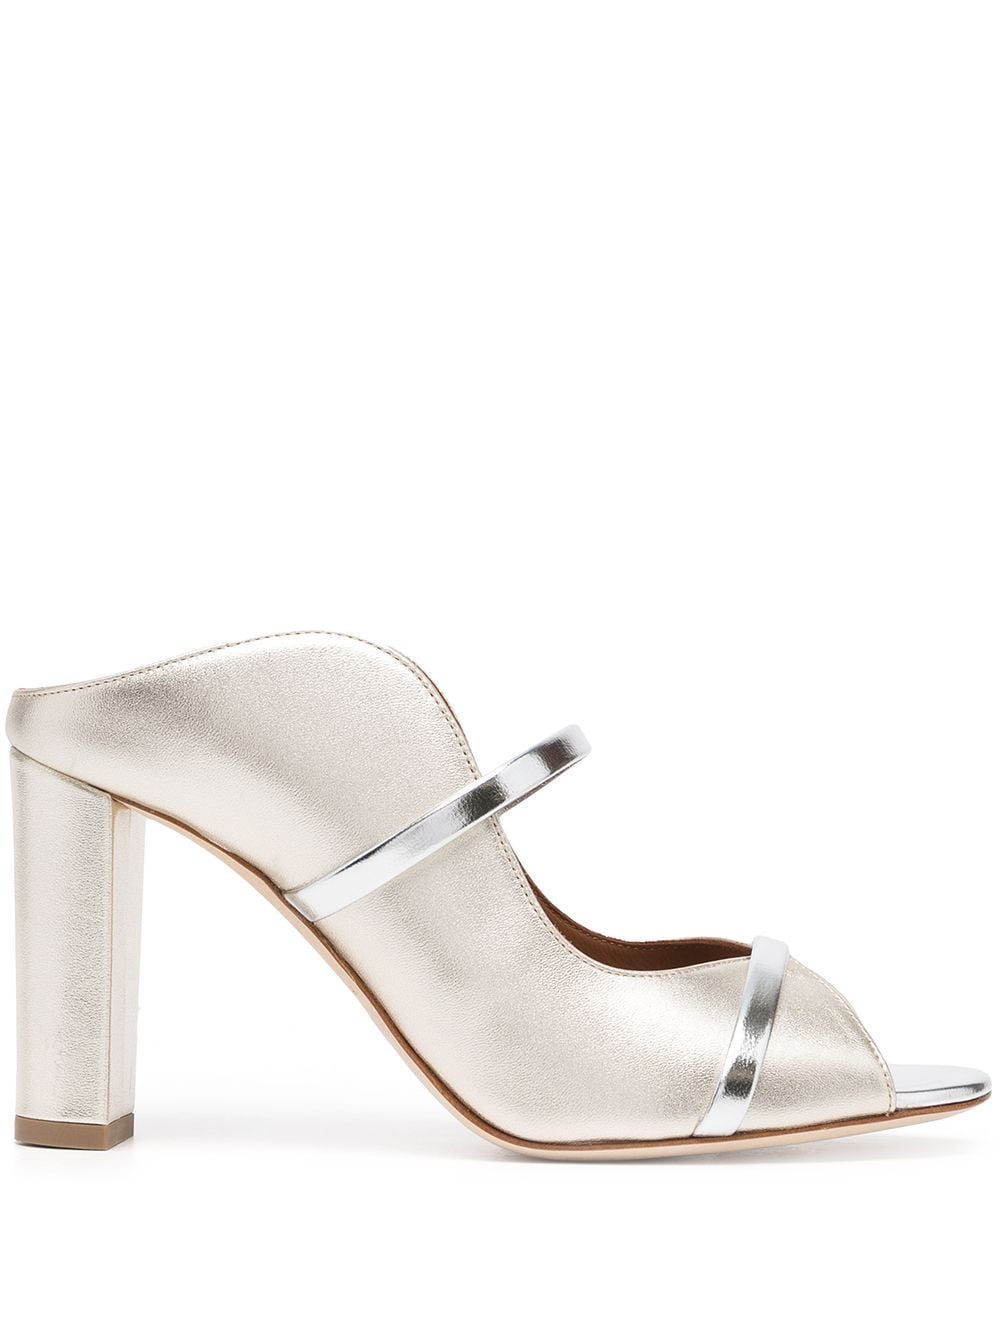 Malone Souliers slip-on peep-toe sandals - Silver von Malone Souliers